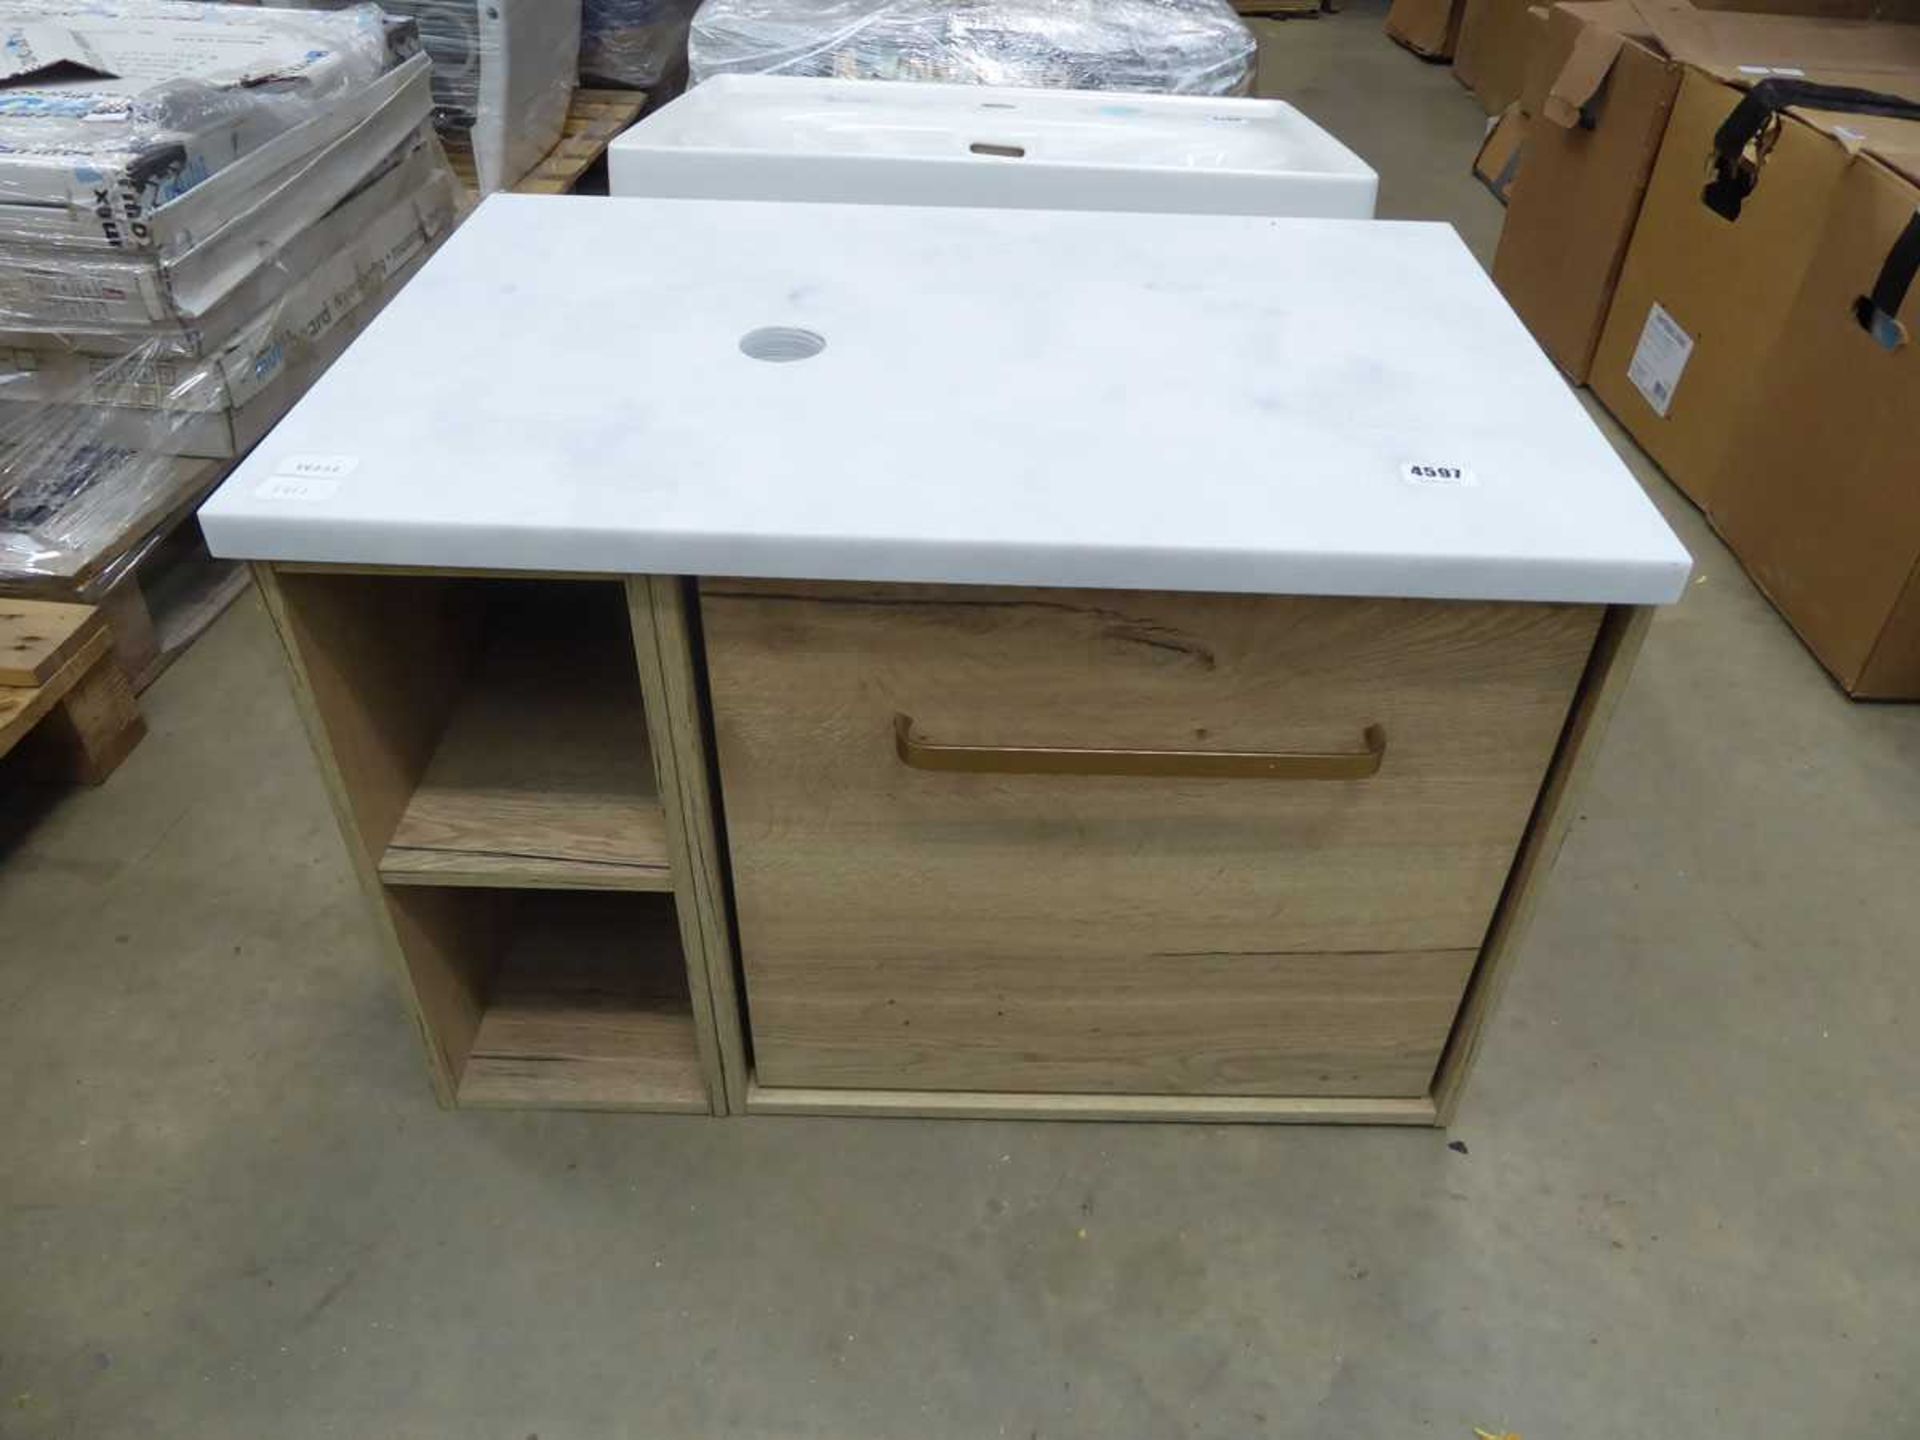 Small vanity unit with top, no sink